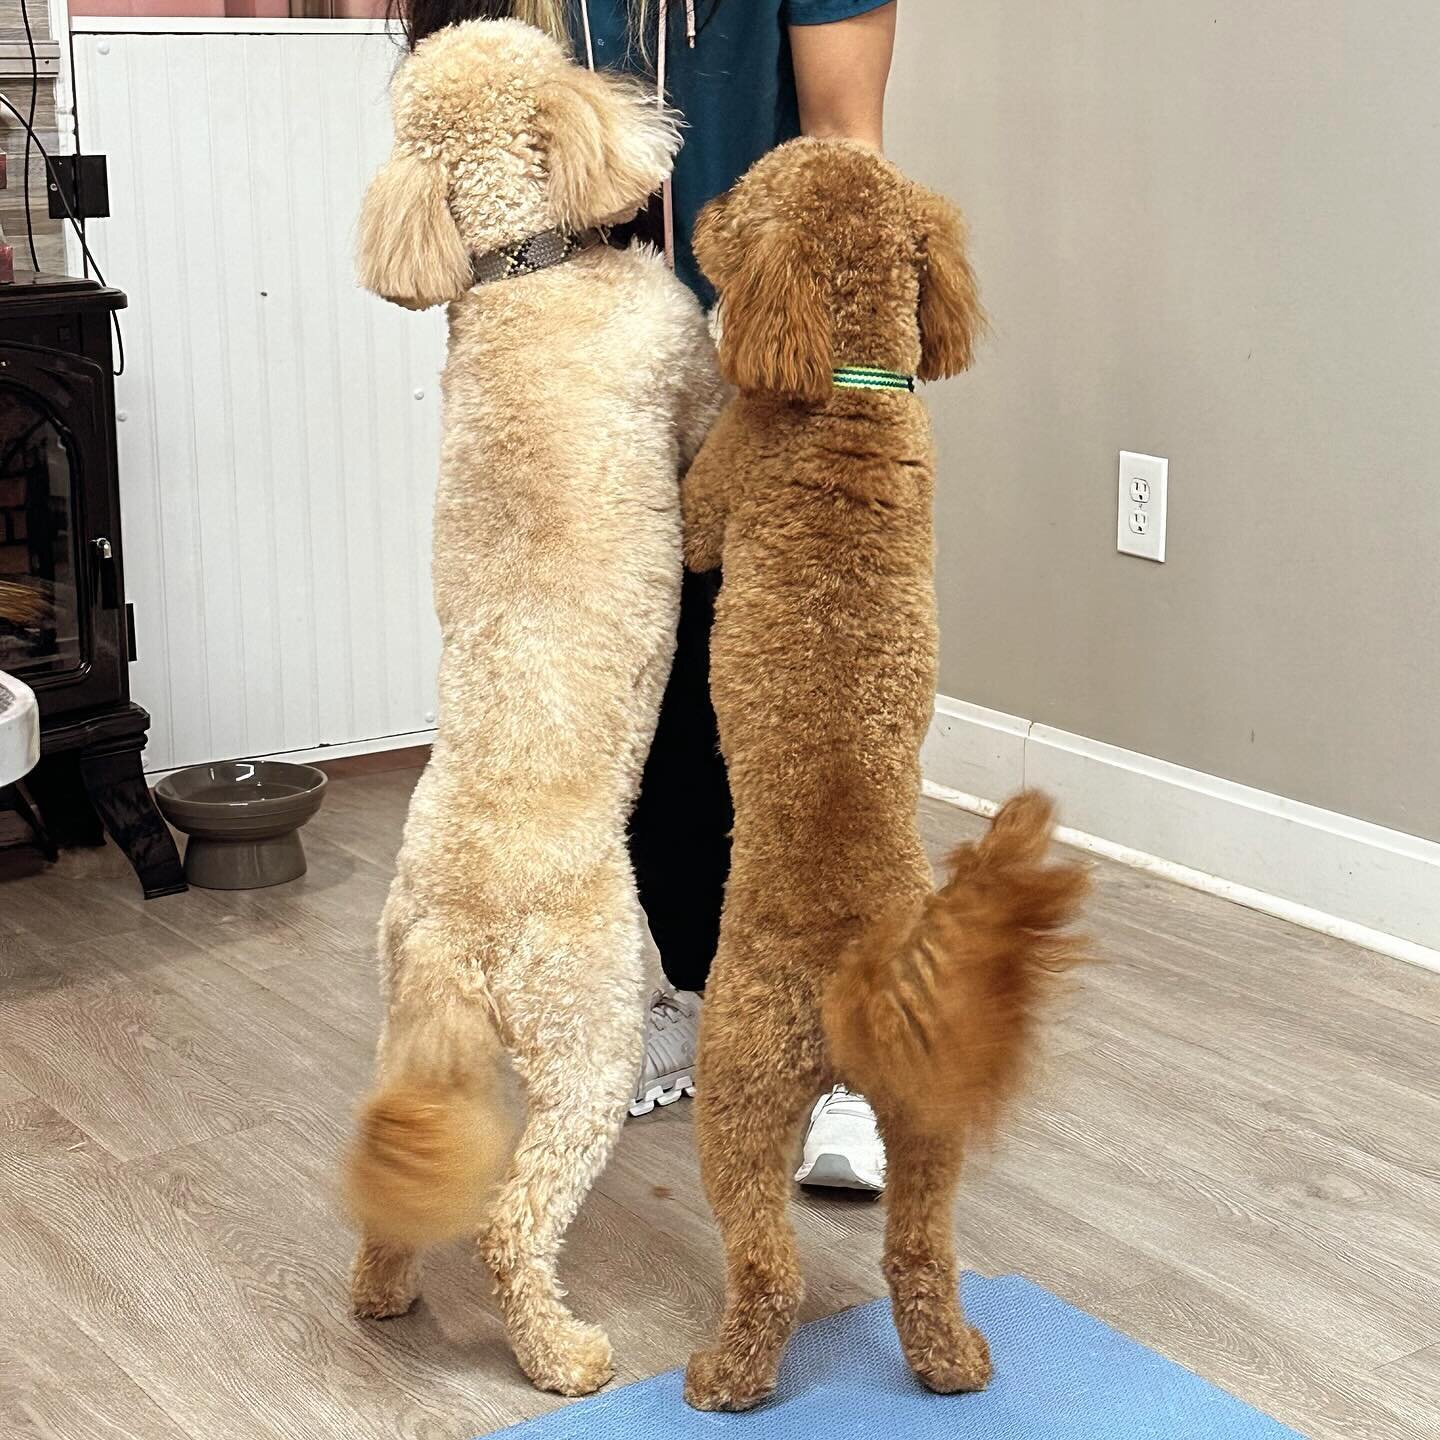 Happy Sunday! These two cuties are Jack and Joey! ❤️❤️🐶🐶🐾🐾 
#goldendoodlegrooming #goldendoodle #doodle #doodlesofinstagram #doodlegrooming #doodlegroomer #doodlesofraleigh #raleighgrooming #raleighdoggrooming #raleighdogs #grooming #doggrooming 